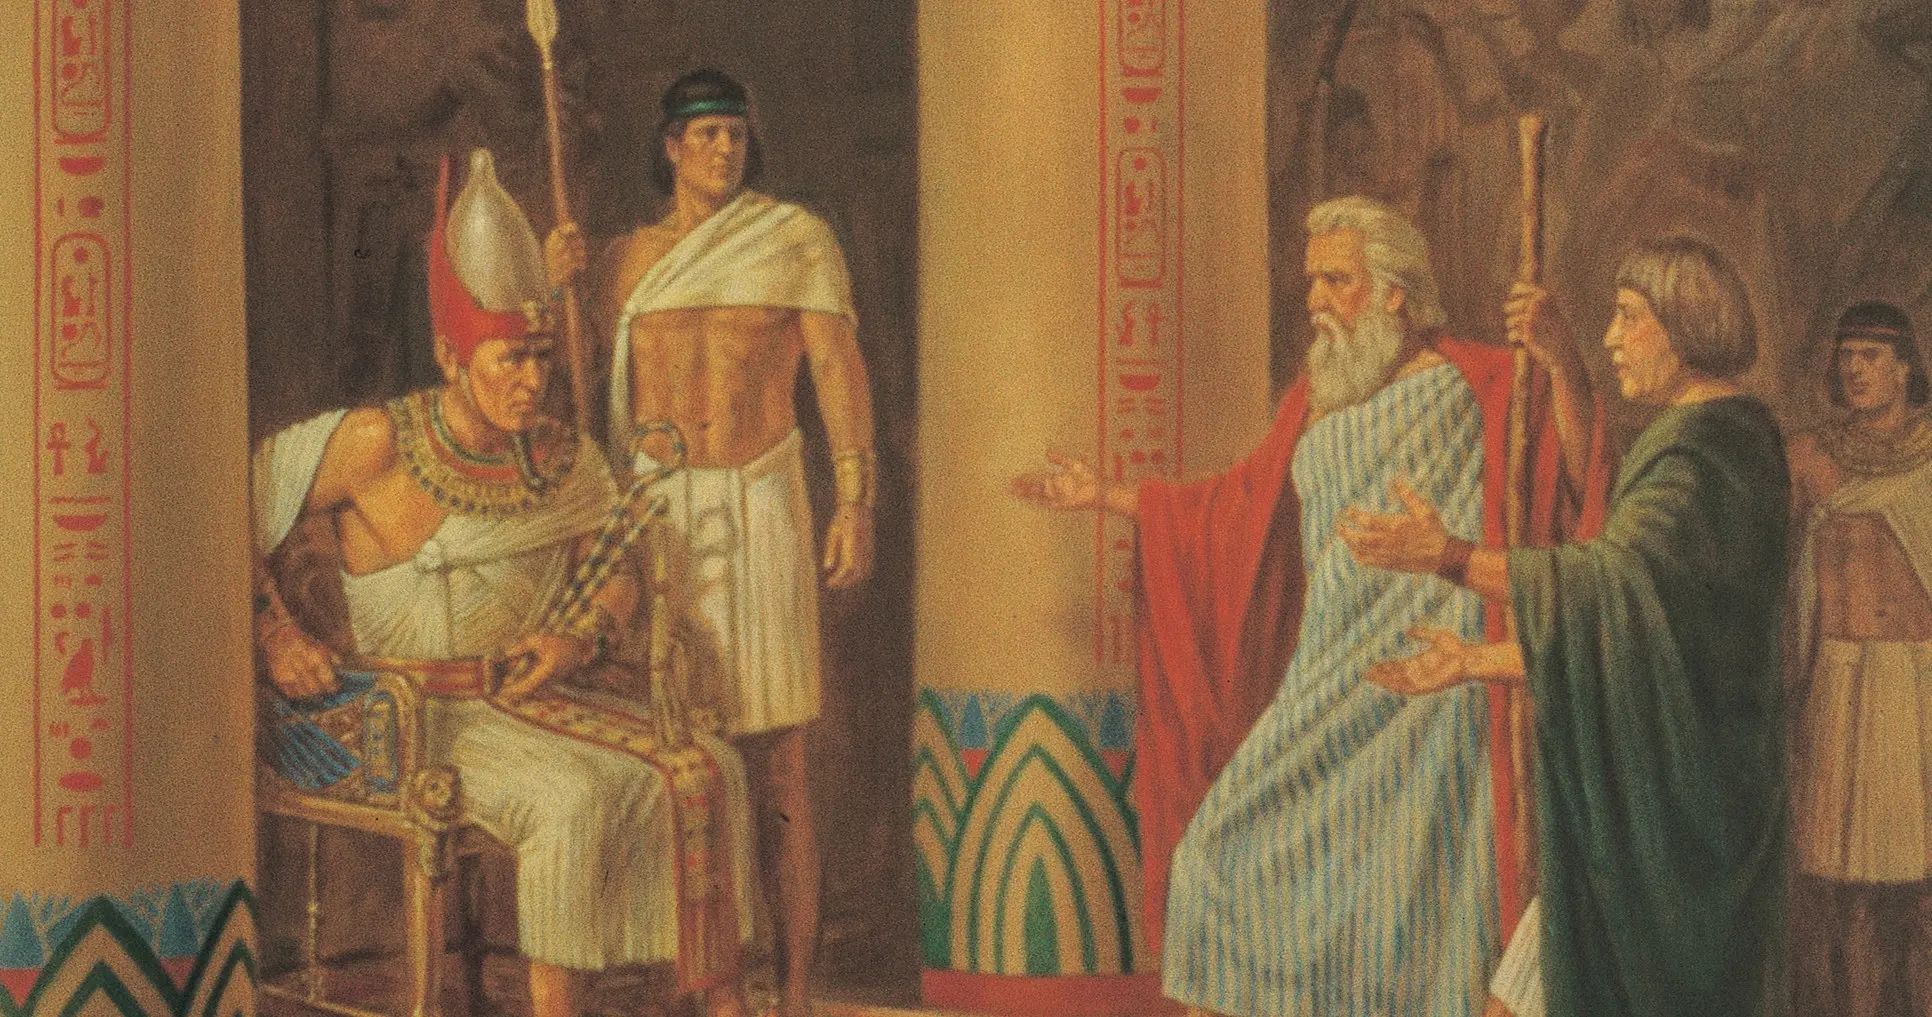 Illustration of Moses and Aaron in the court of Pharaoh, by Robert T. Barret. Image via Church of Jesus Christ.